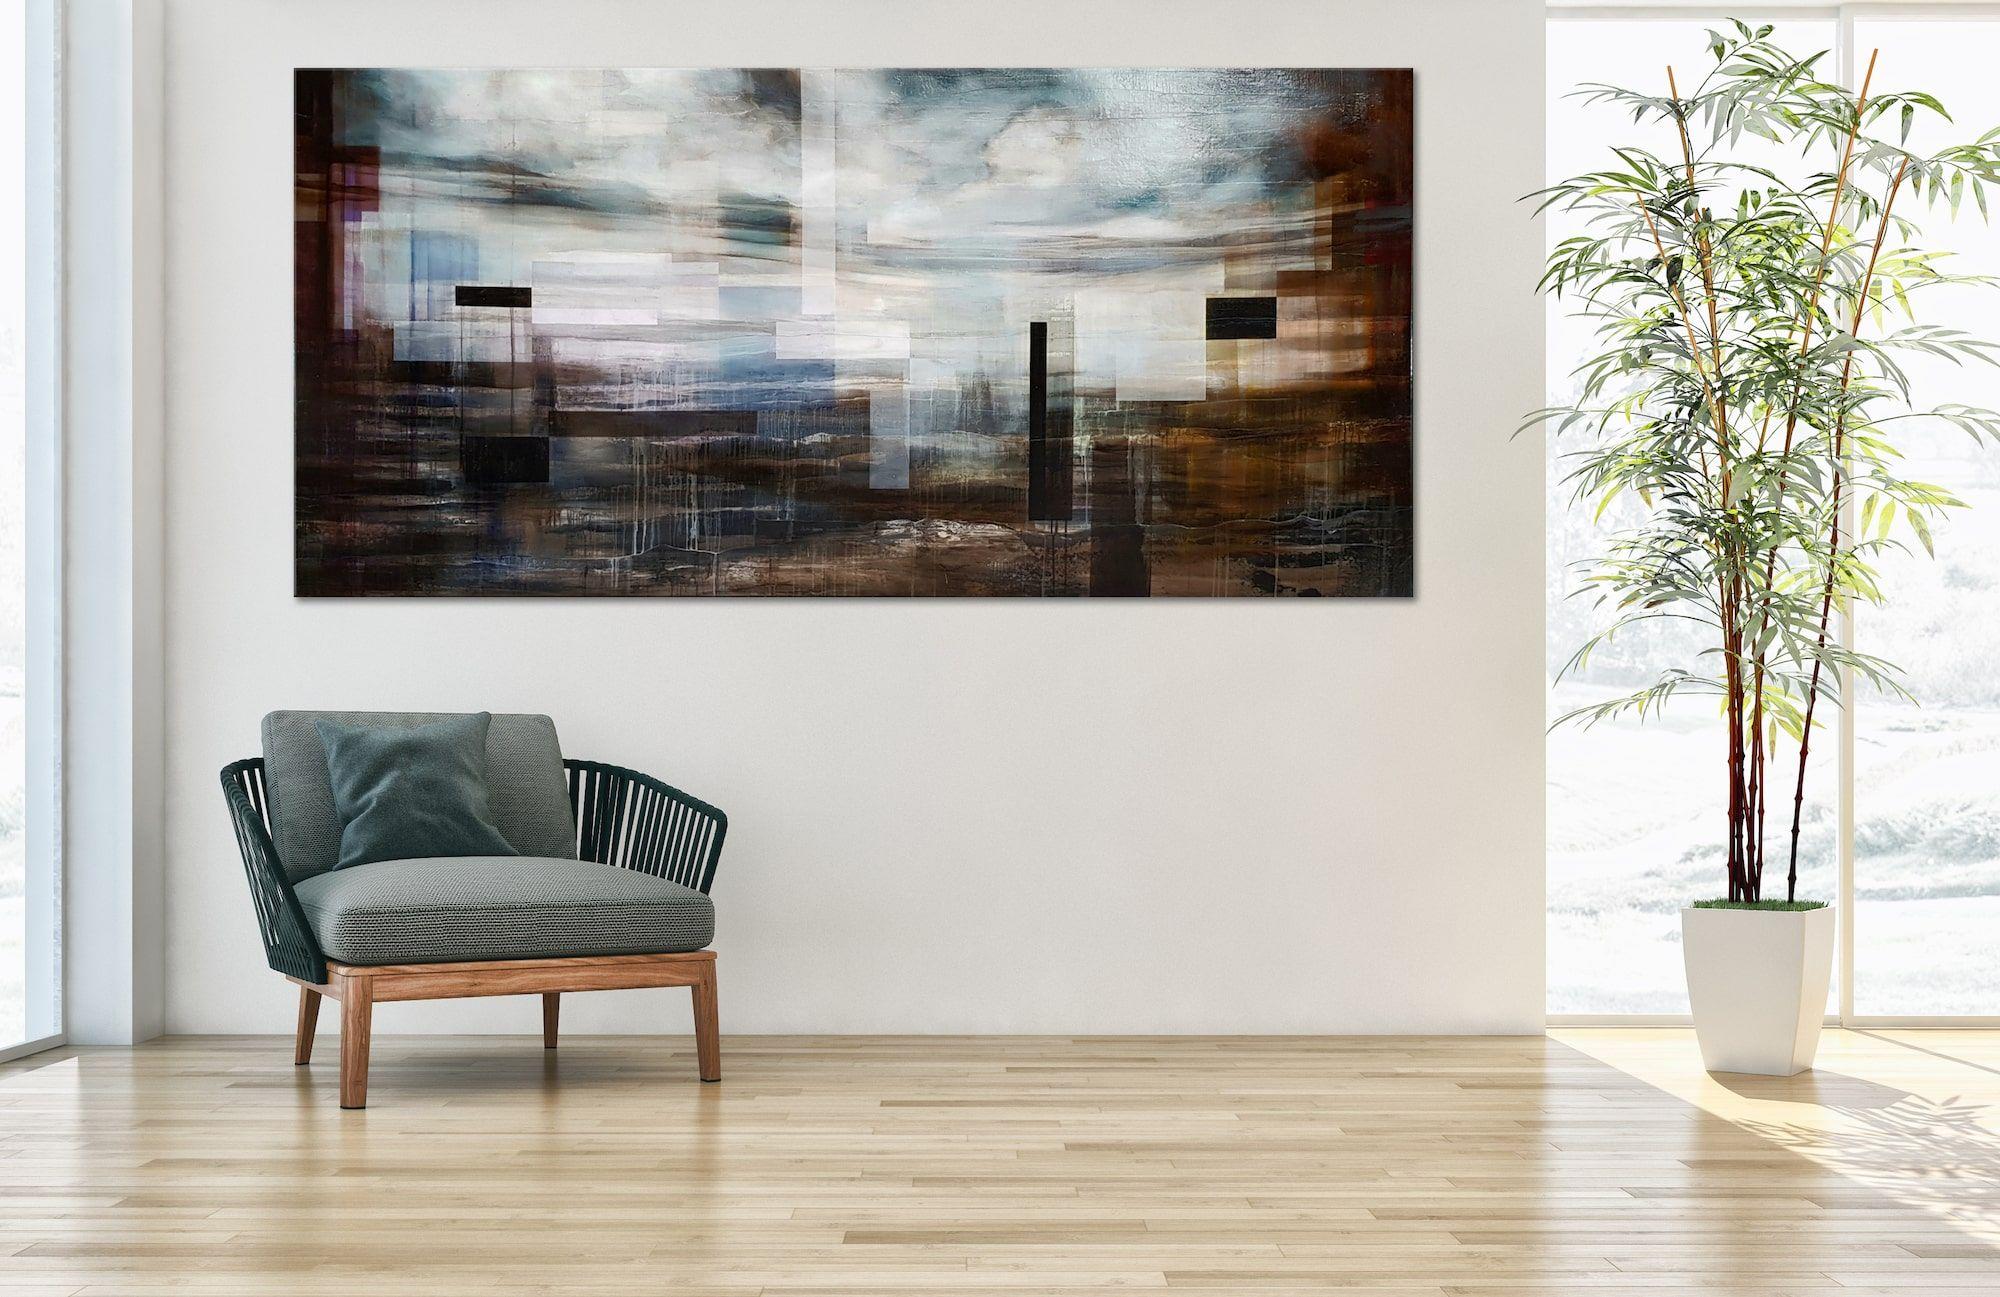 Spectrum I by Joachim van der Vlugt - Semi-abstract painting, large-scale For Sale 5